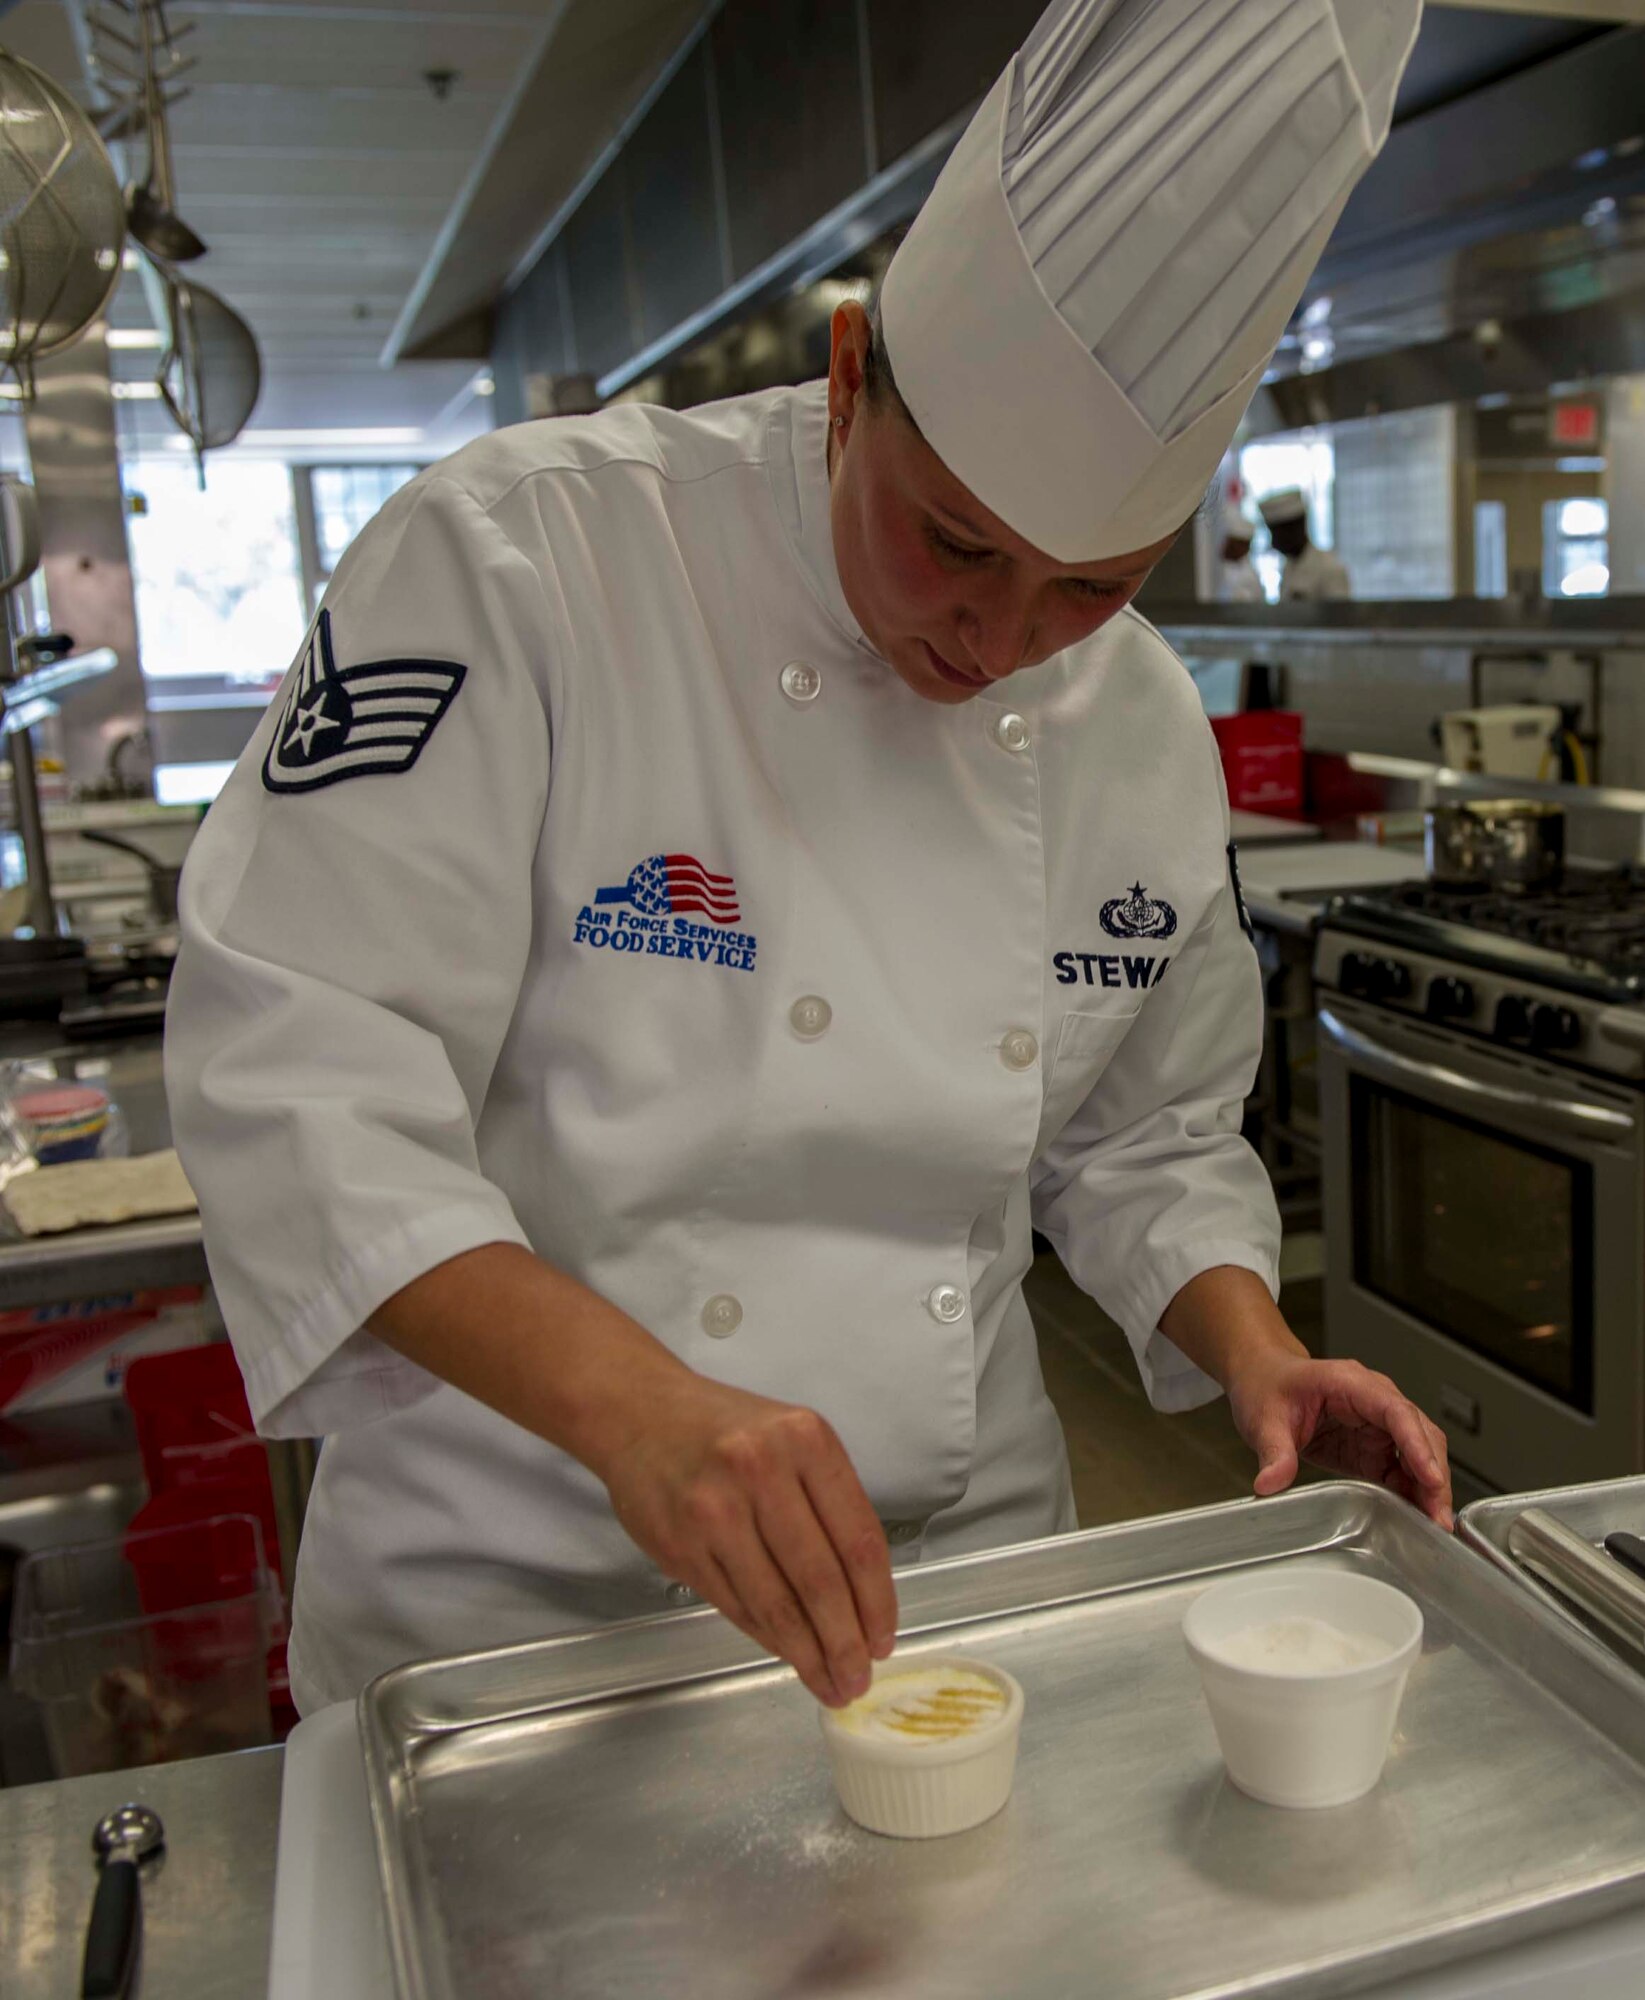 Staff Sgt. Sheryl Stewart, a 647th Force Support Squadron Airman assigned to the Joint Culinary Arts Team Hawaii, sprinkles sugar on a poached pear crème brulee dessert in the training kitchen at Schofield Barracks Oct. 22, 2014. Stewart will join 15 Soldiers, Sailors and Marines from around the island to face off in the annual Military Culinary Arts Competitive Training Event in Fort Lee, Va., next year. (U.S. Air Force photo by Tech. Sgt. Terri Paden)